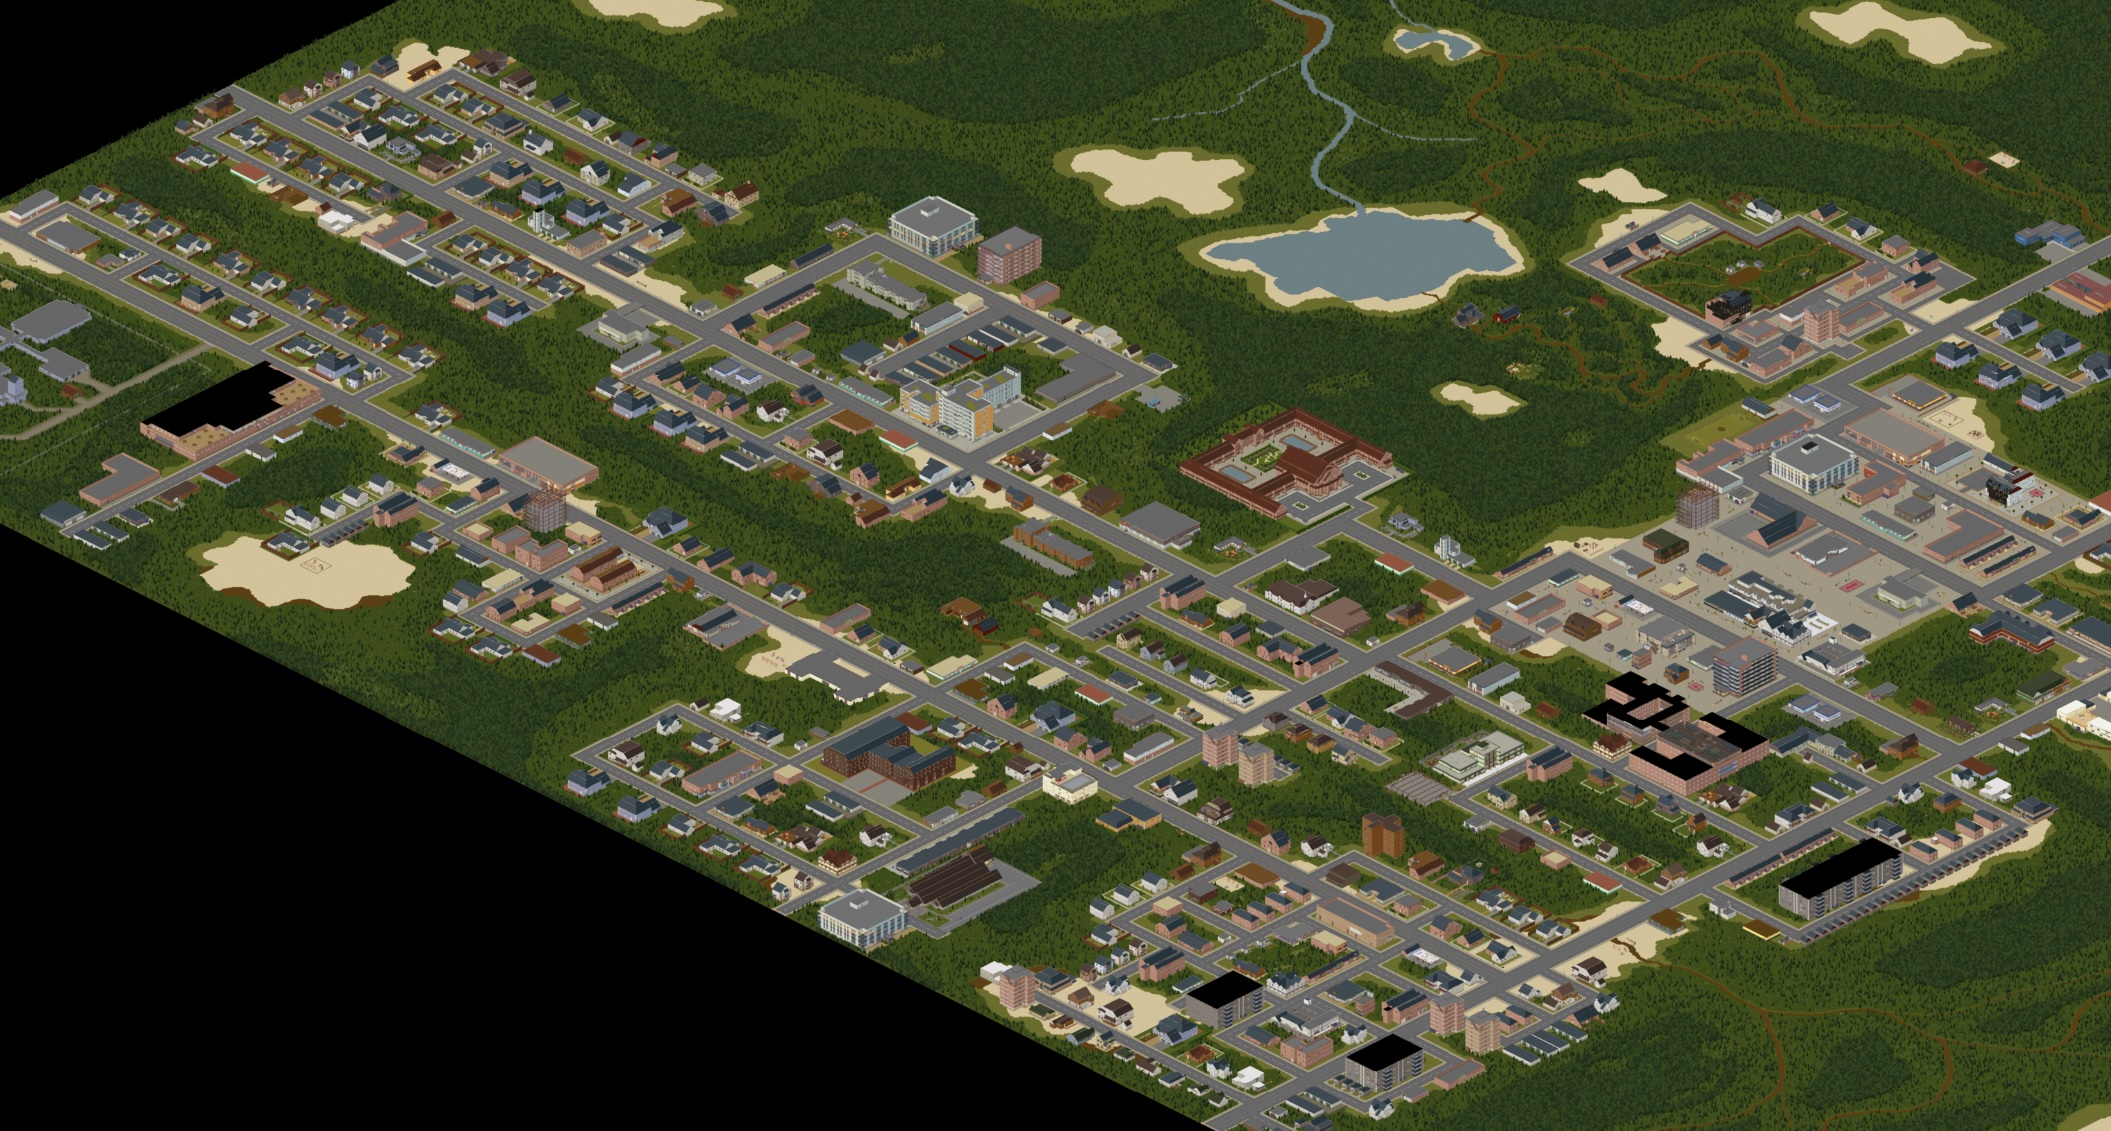 download project zomboid build 42